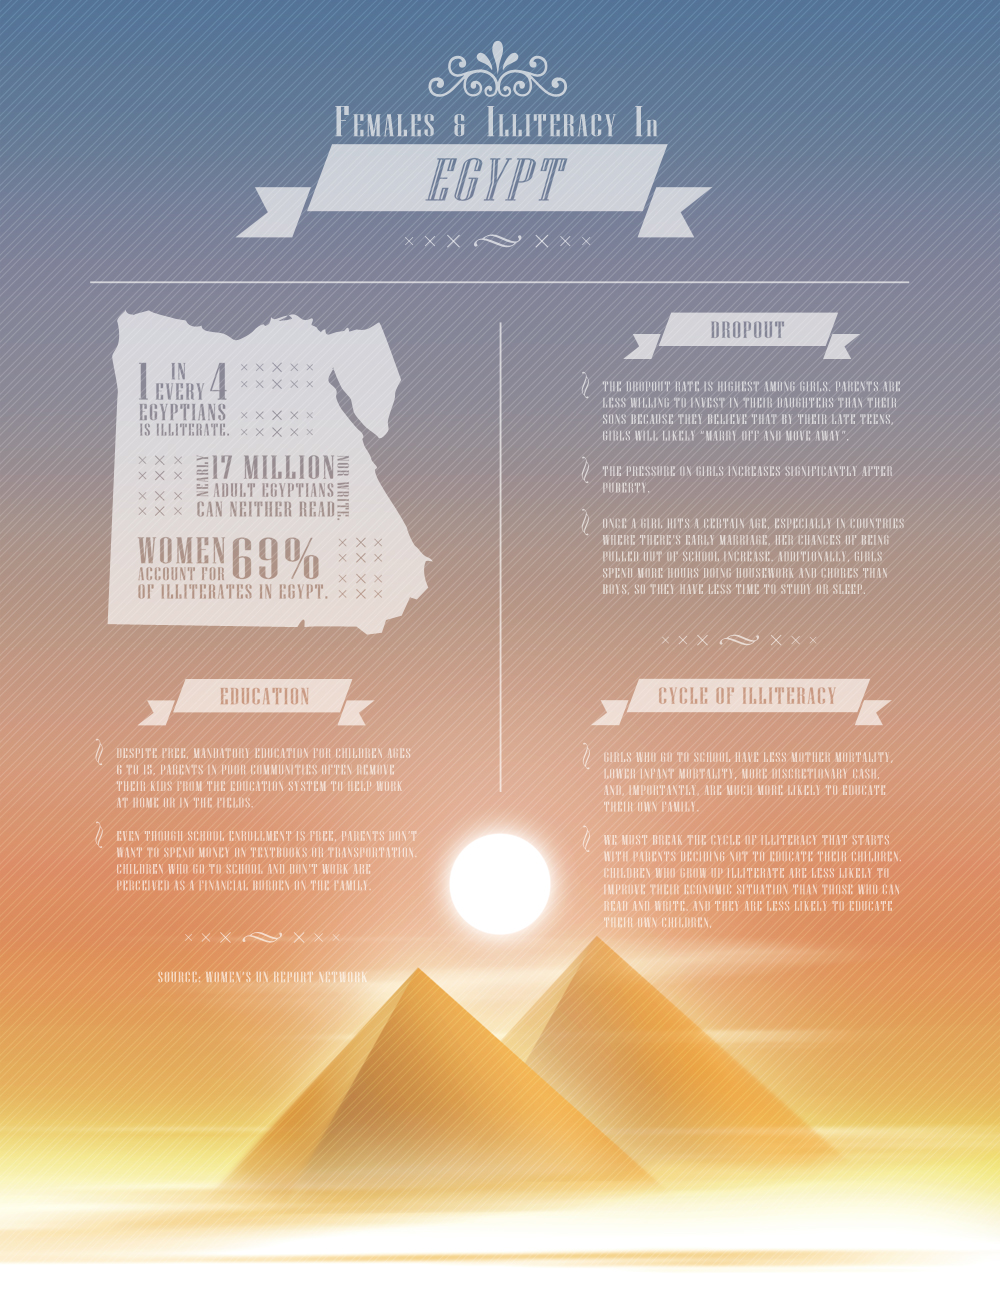 Women and Illiteracy in Egypt Infographic